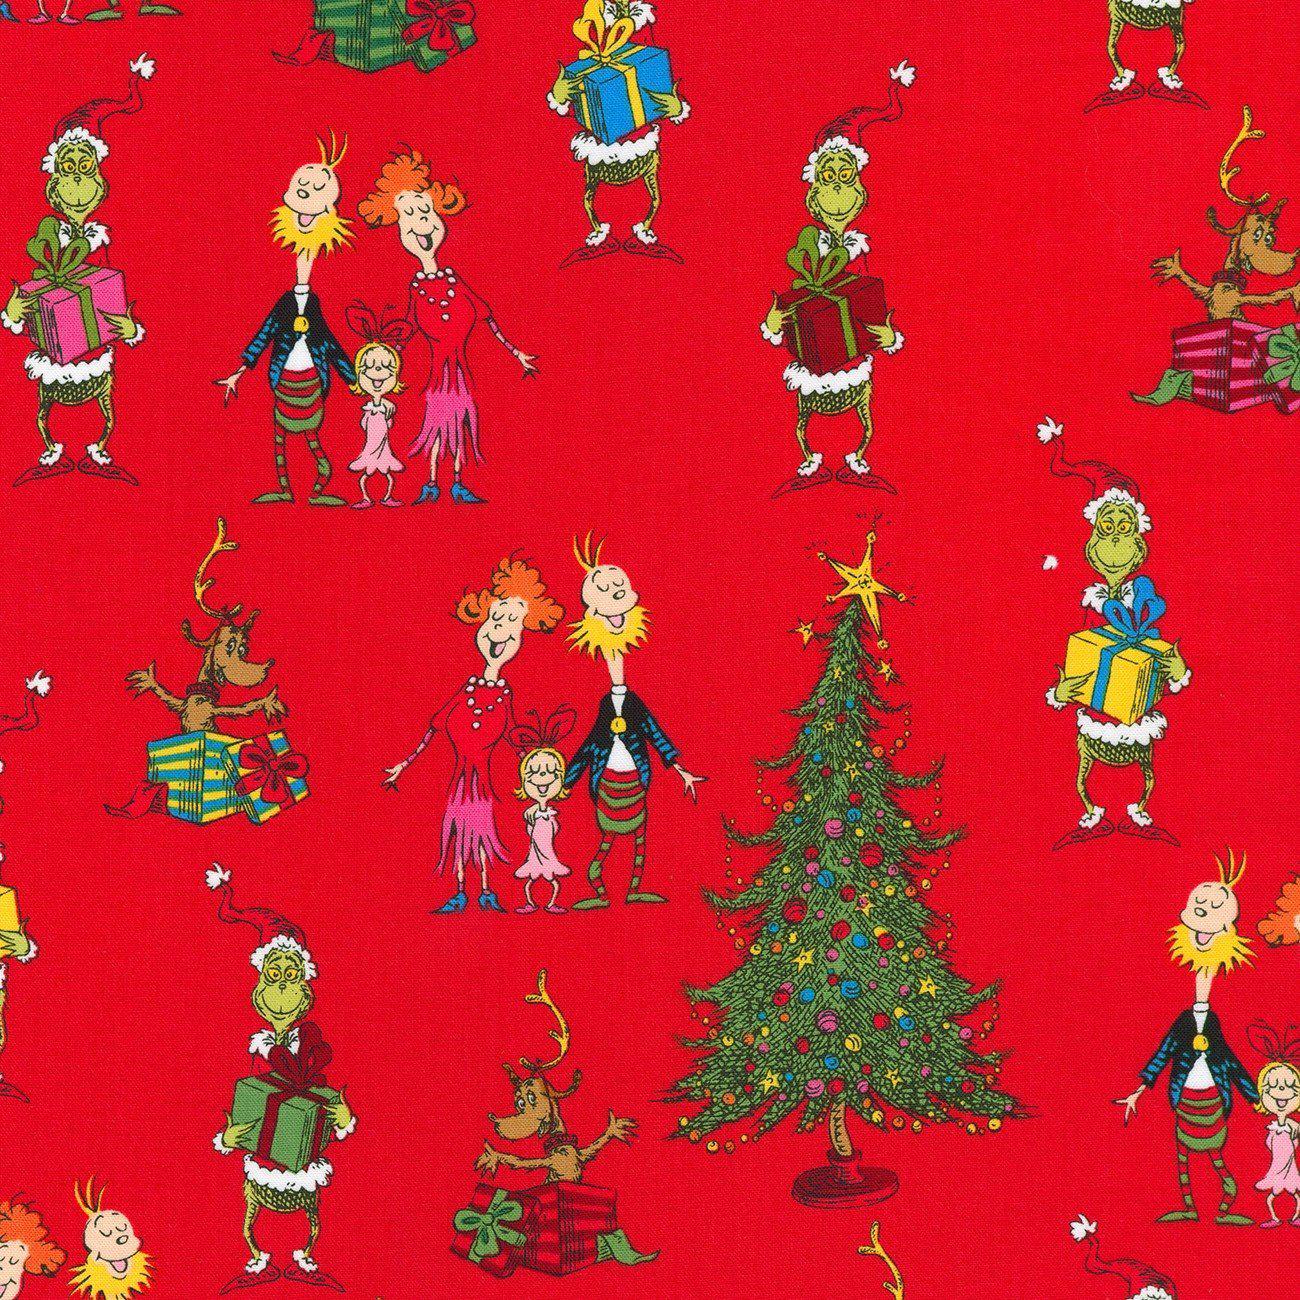 Dr. Seuss How the Grinch Stole Christmas White Fabric by Dr. Seuss